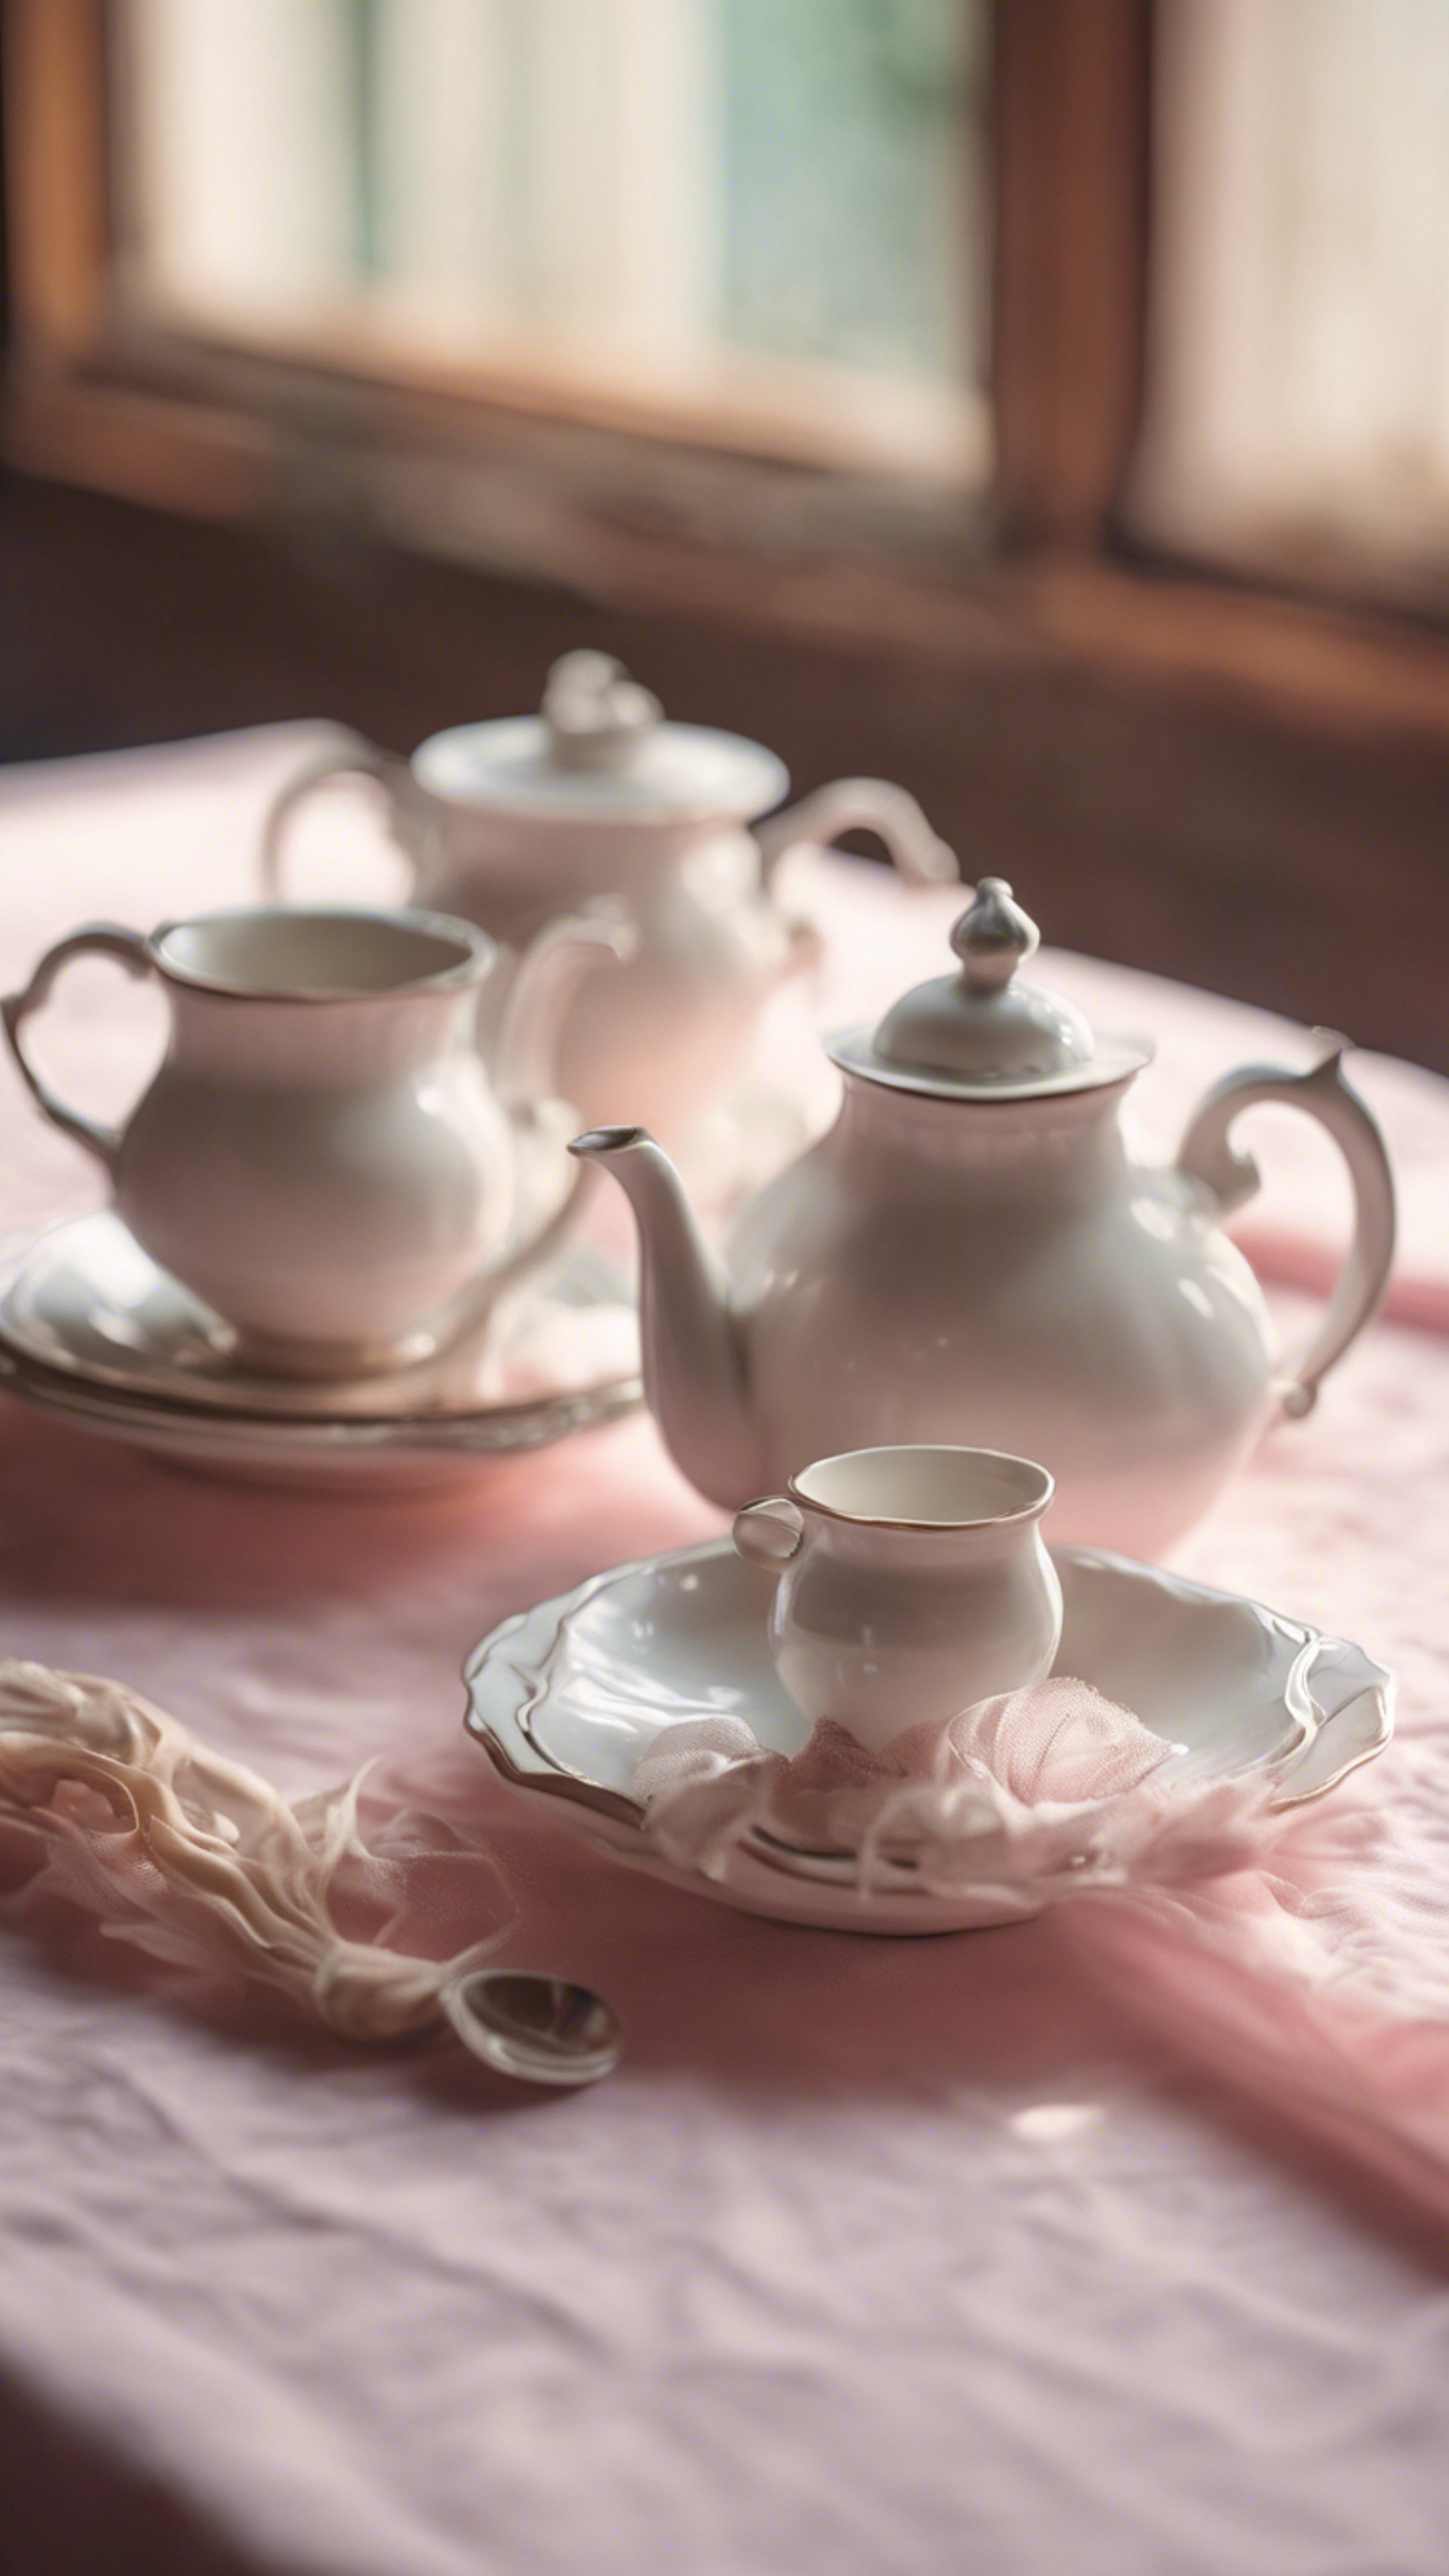 A vintage white tea set, arranged on a fluffy pastel pink tablecloth in a charming, old-world kitchen. Tapeta[519305883ddb44018966]